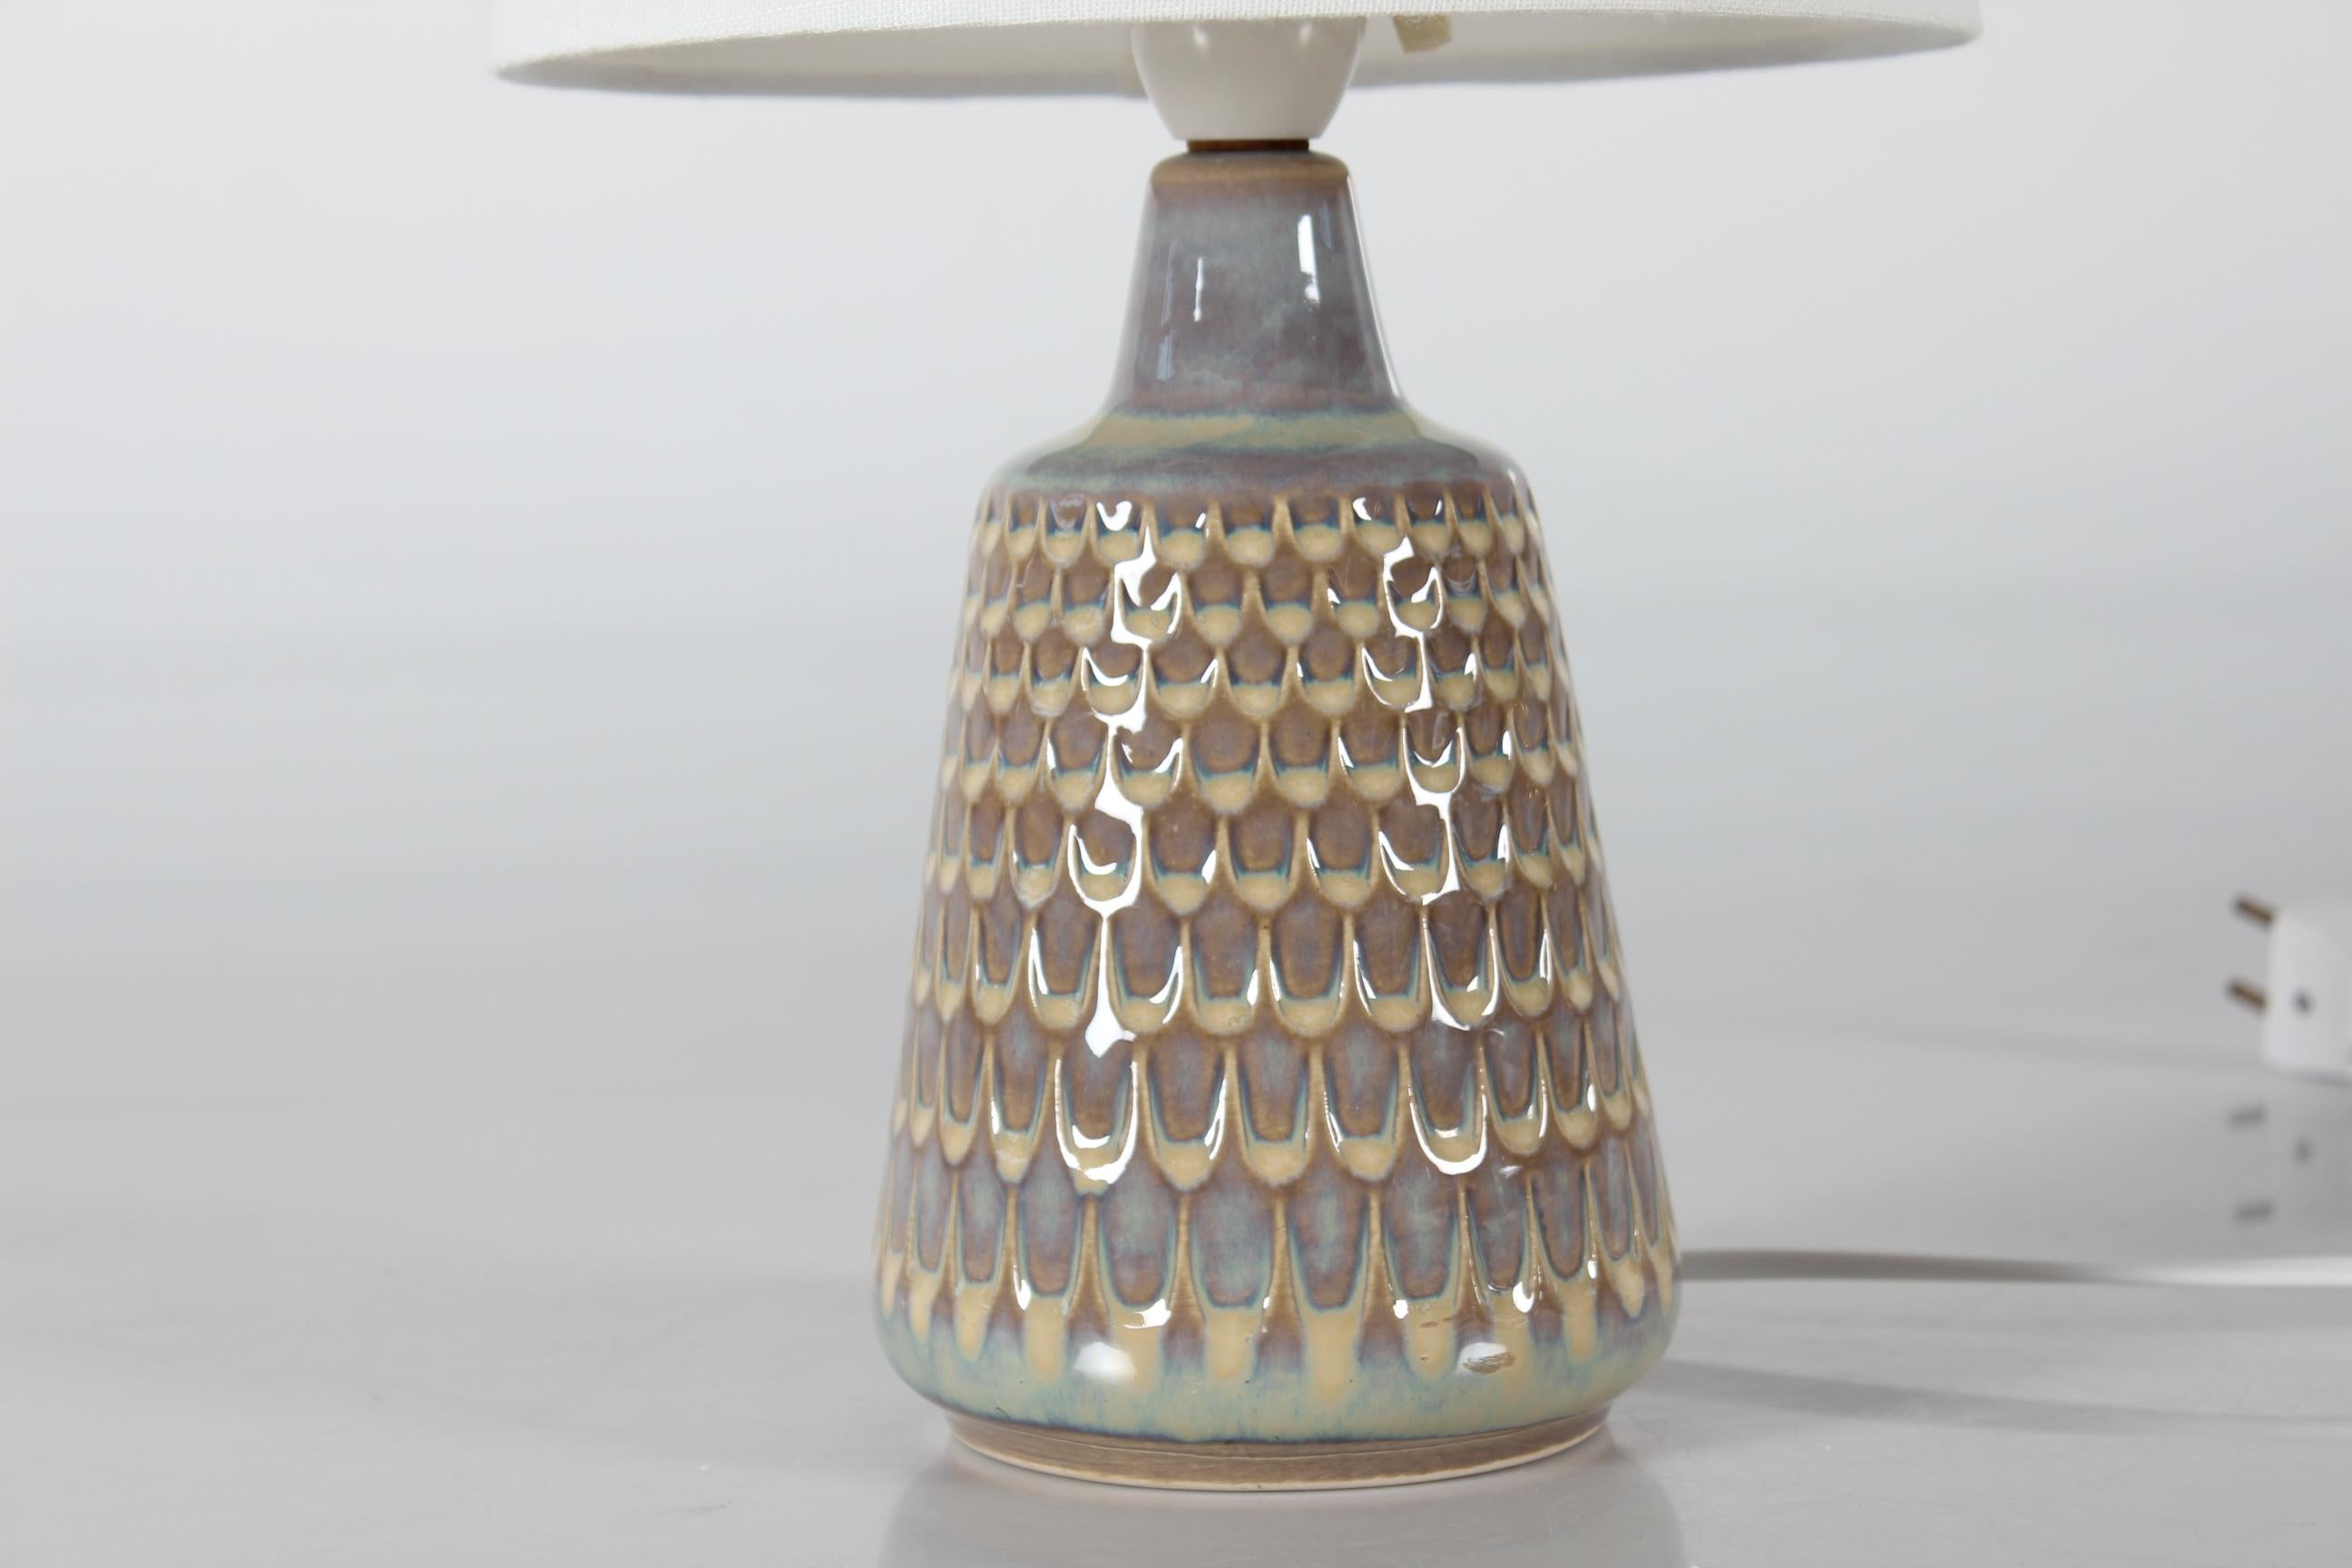 Small stoneware table lamp in Einar Johansen style made for Søholm Stentøj, Denmark, circa 1960s.
The lamp is decorated with a glossy dusty sand yellow and dusty lilac colored glaze turning into turquoise over a pattern in style of fish scales

The